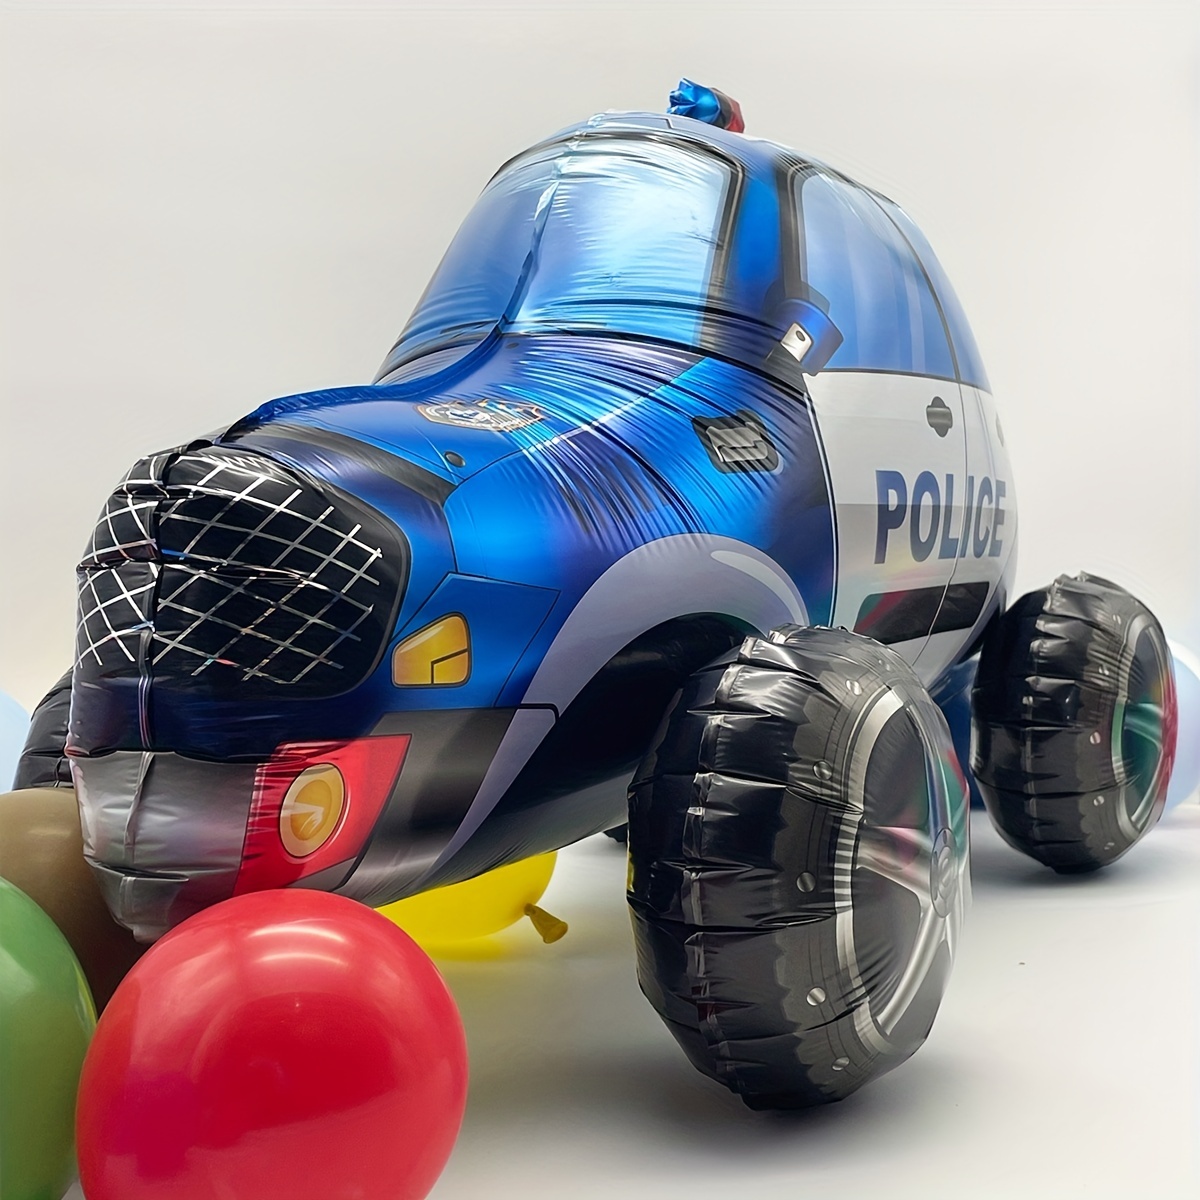 

5pcs, Assembled Police Car Balloon Set - Perfect For Birthday Parties And Aesthetic Room Decor - Party Decorations Supplies